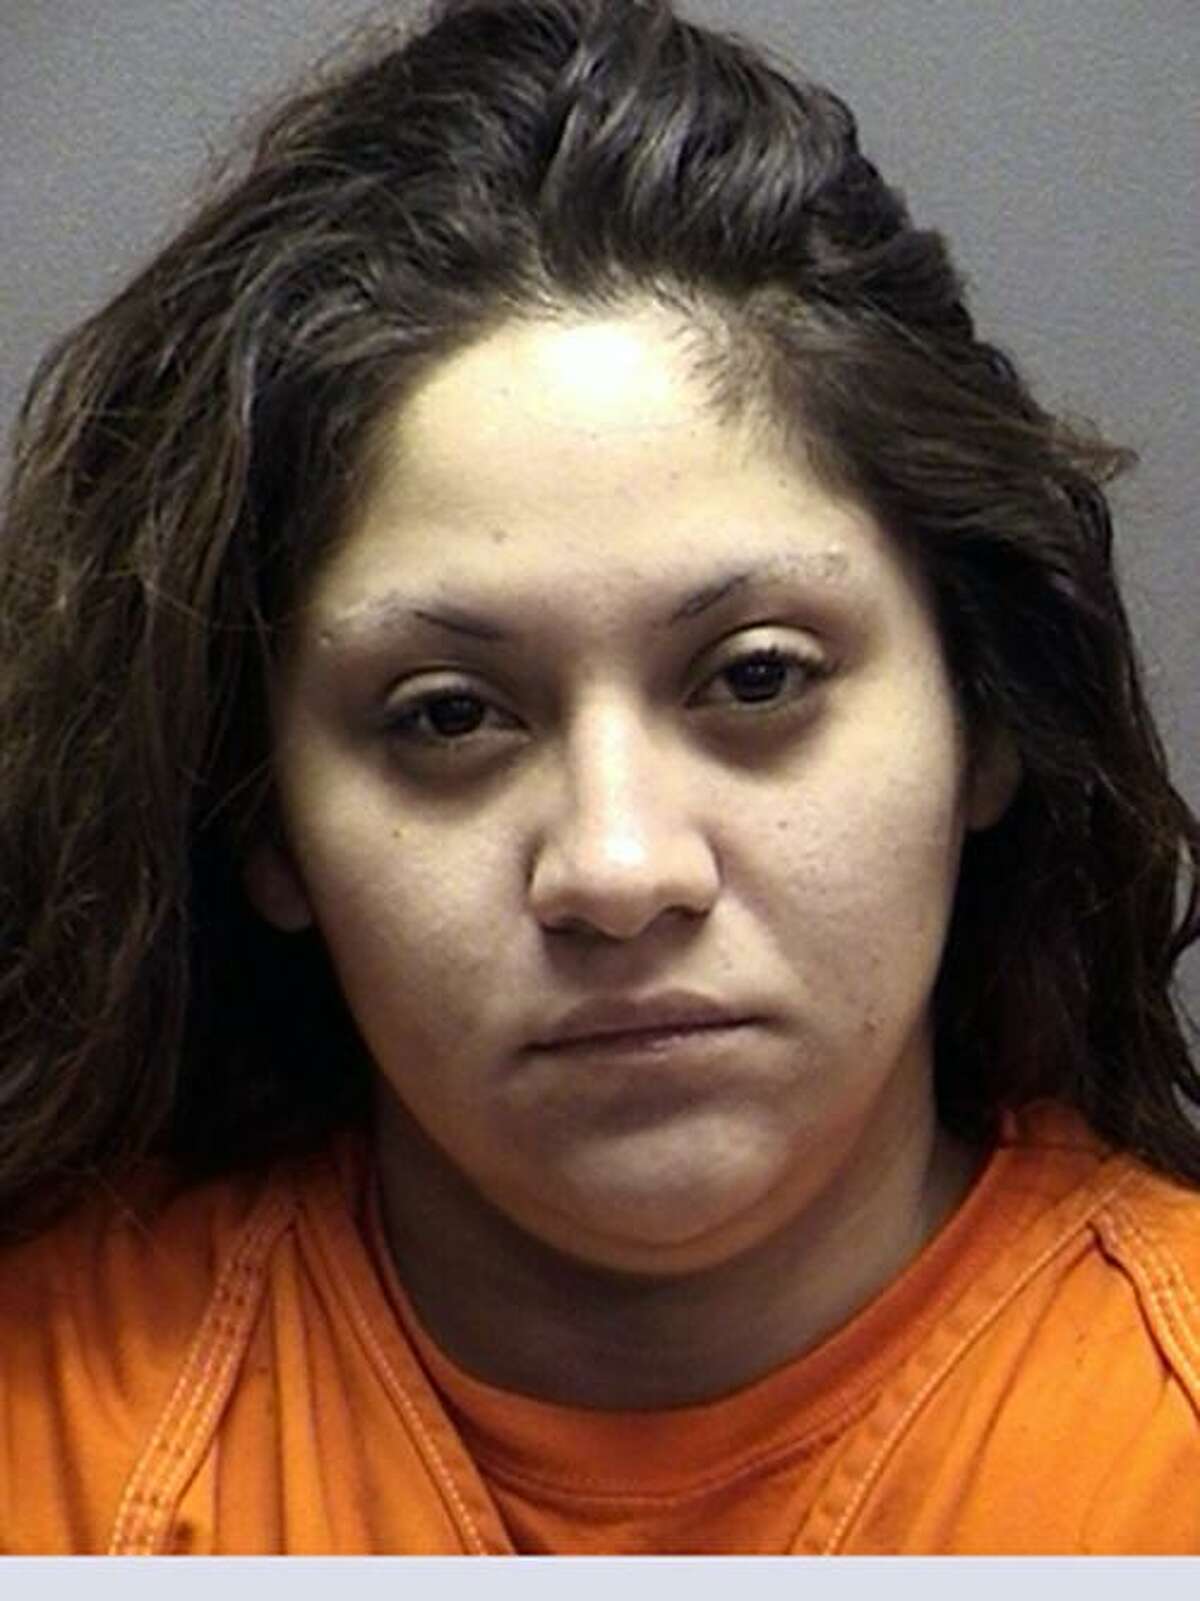 Jenevieve Ramos, who drove the getaway car when her boyfriend, Shaun Puente, shot San Antonio Police Officer Robert Deckard in 2013, was sentenced to life in prison for her role in the policeman’s death.